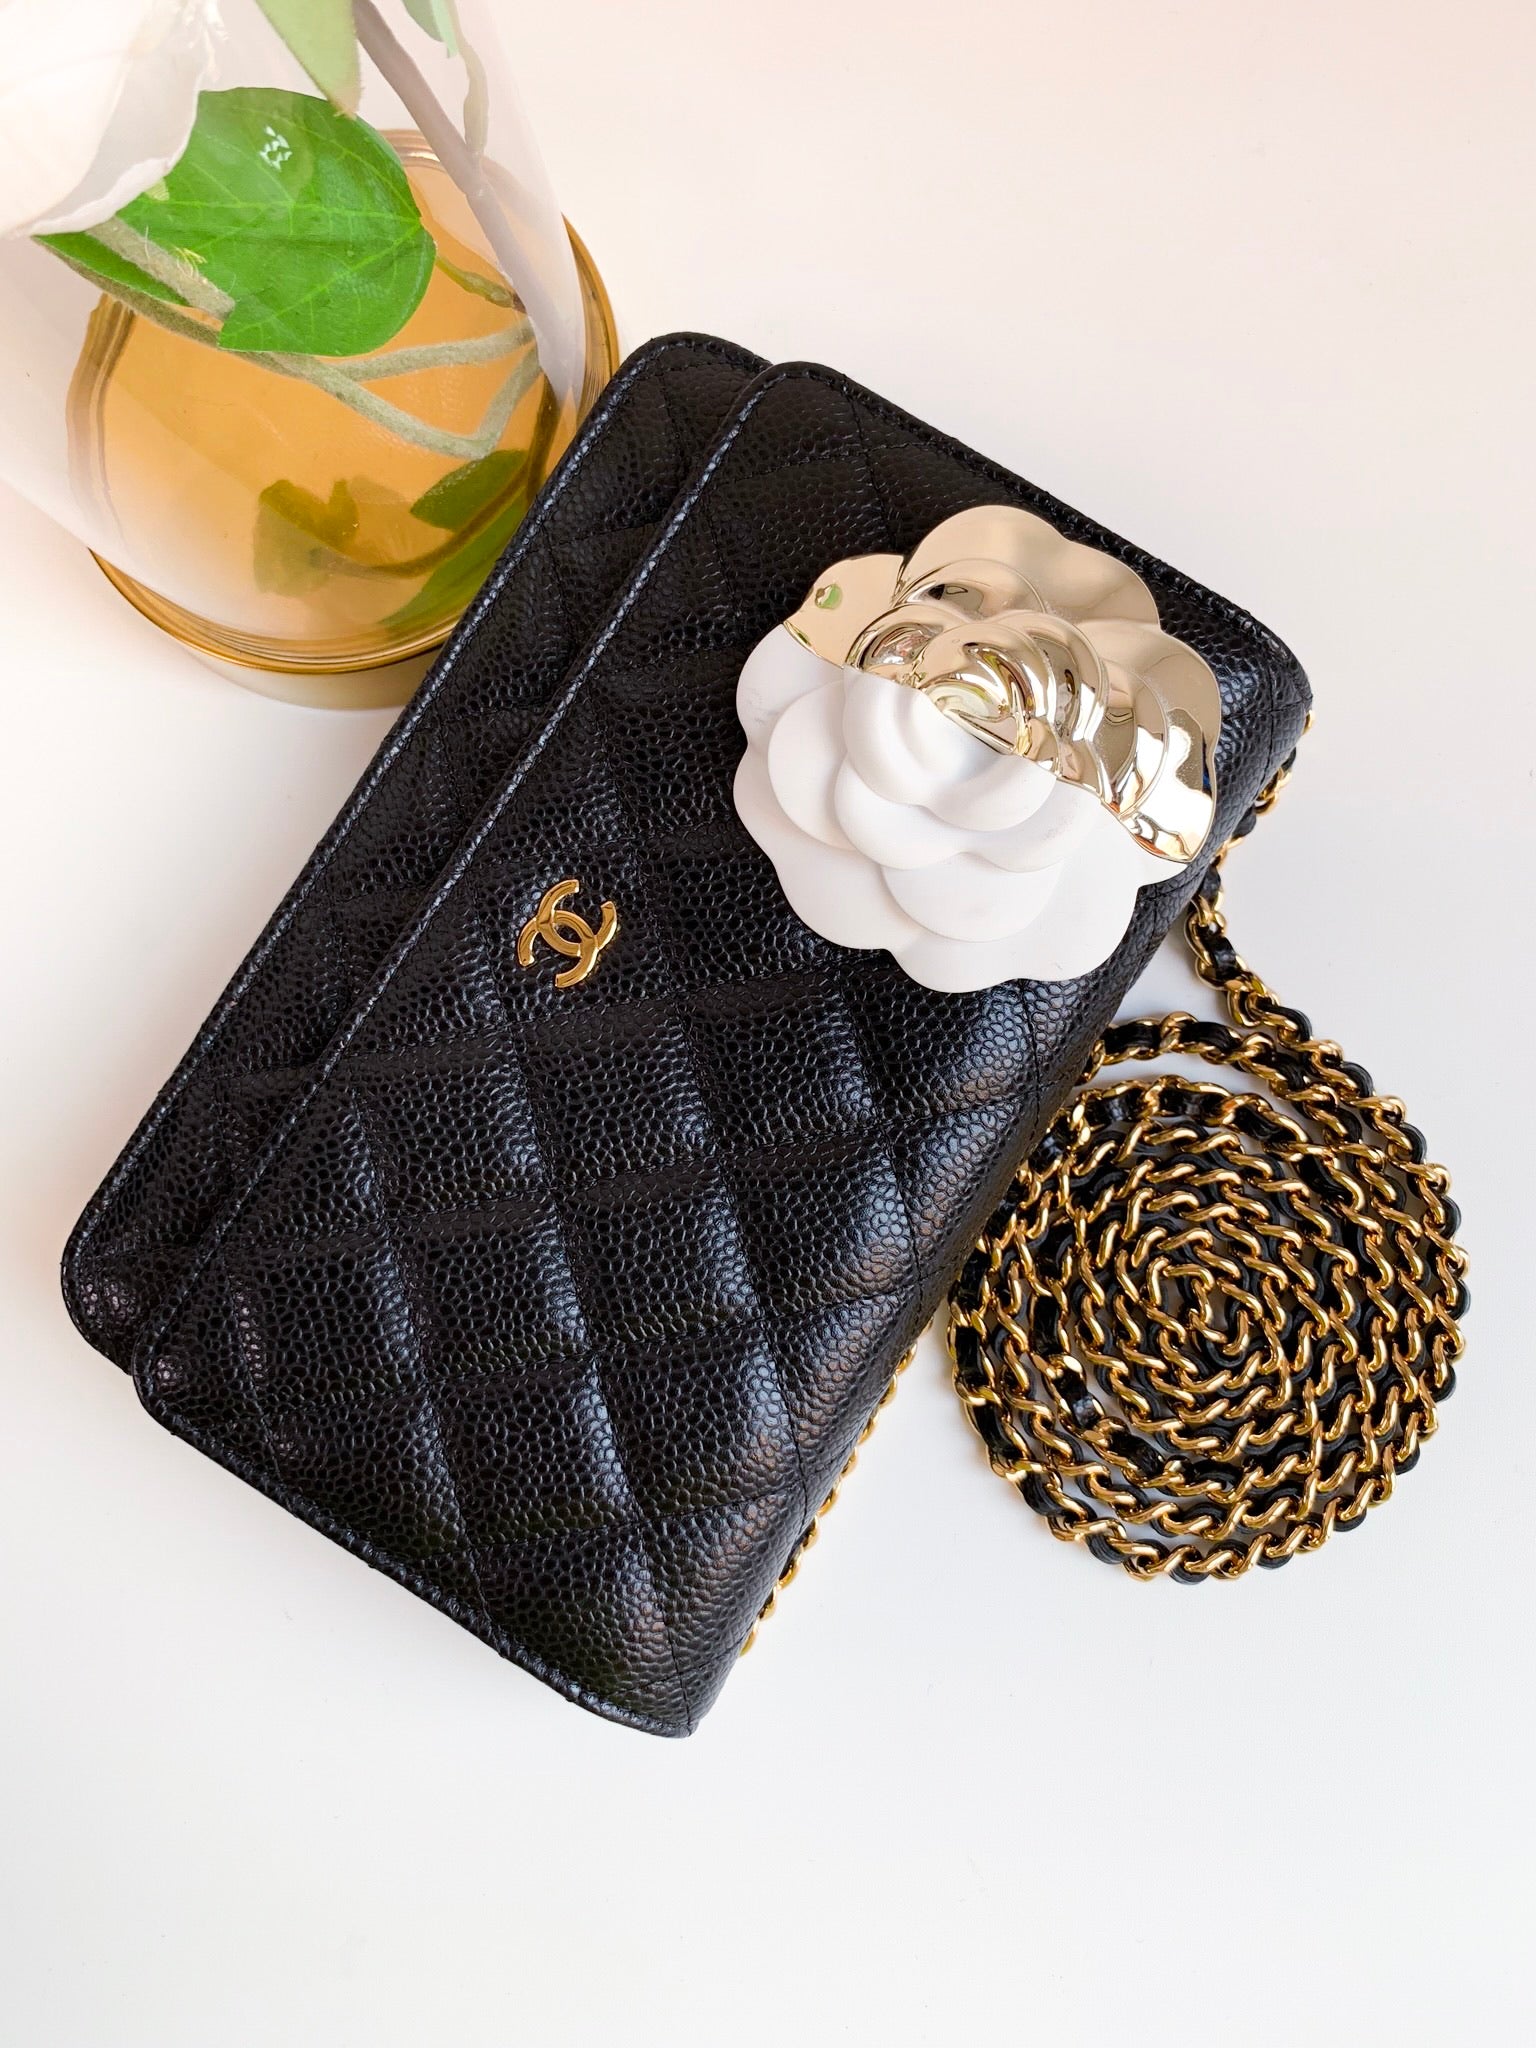 Chanel Classic Wallet on Chain WOC Black Caviar Gold Hardware